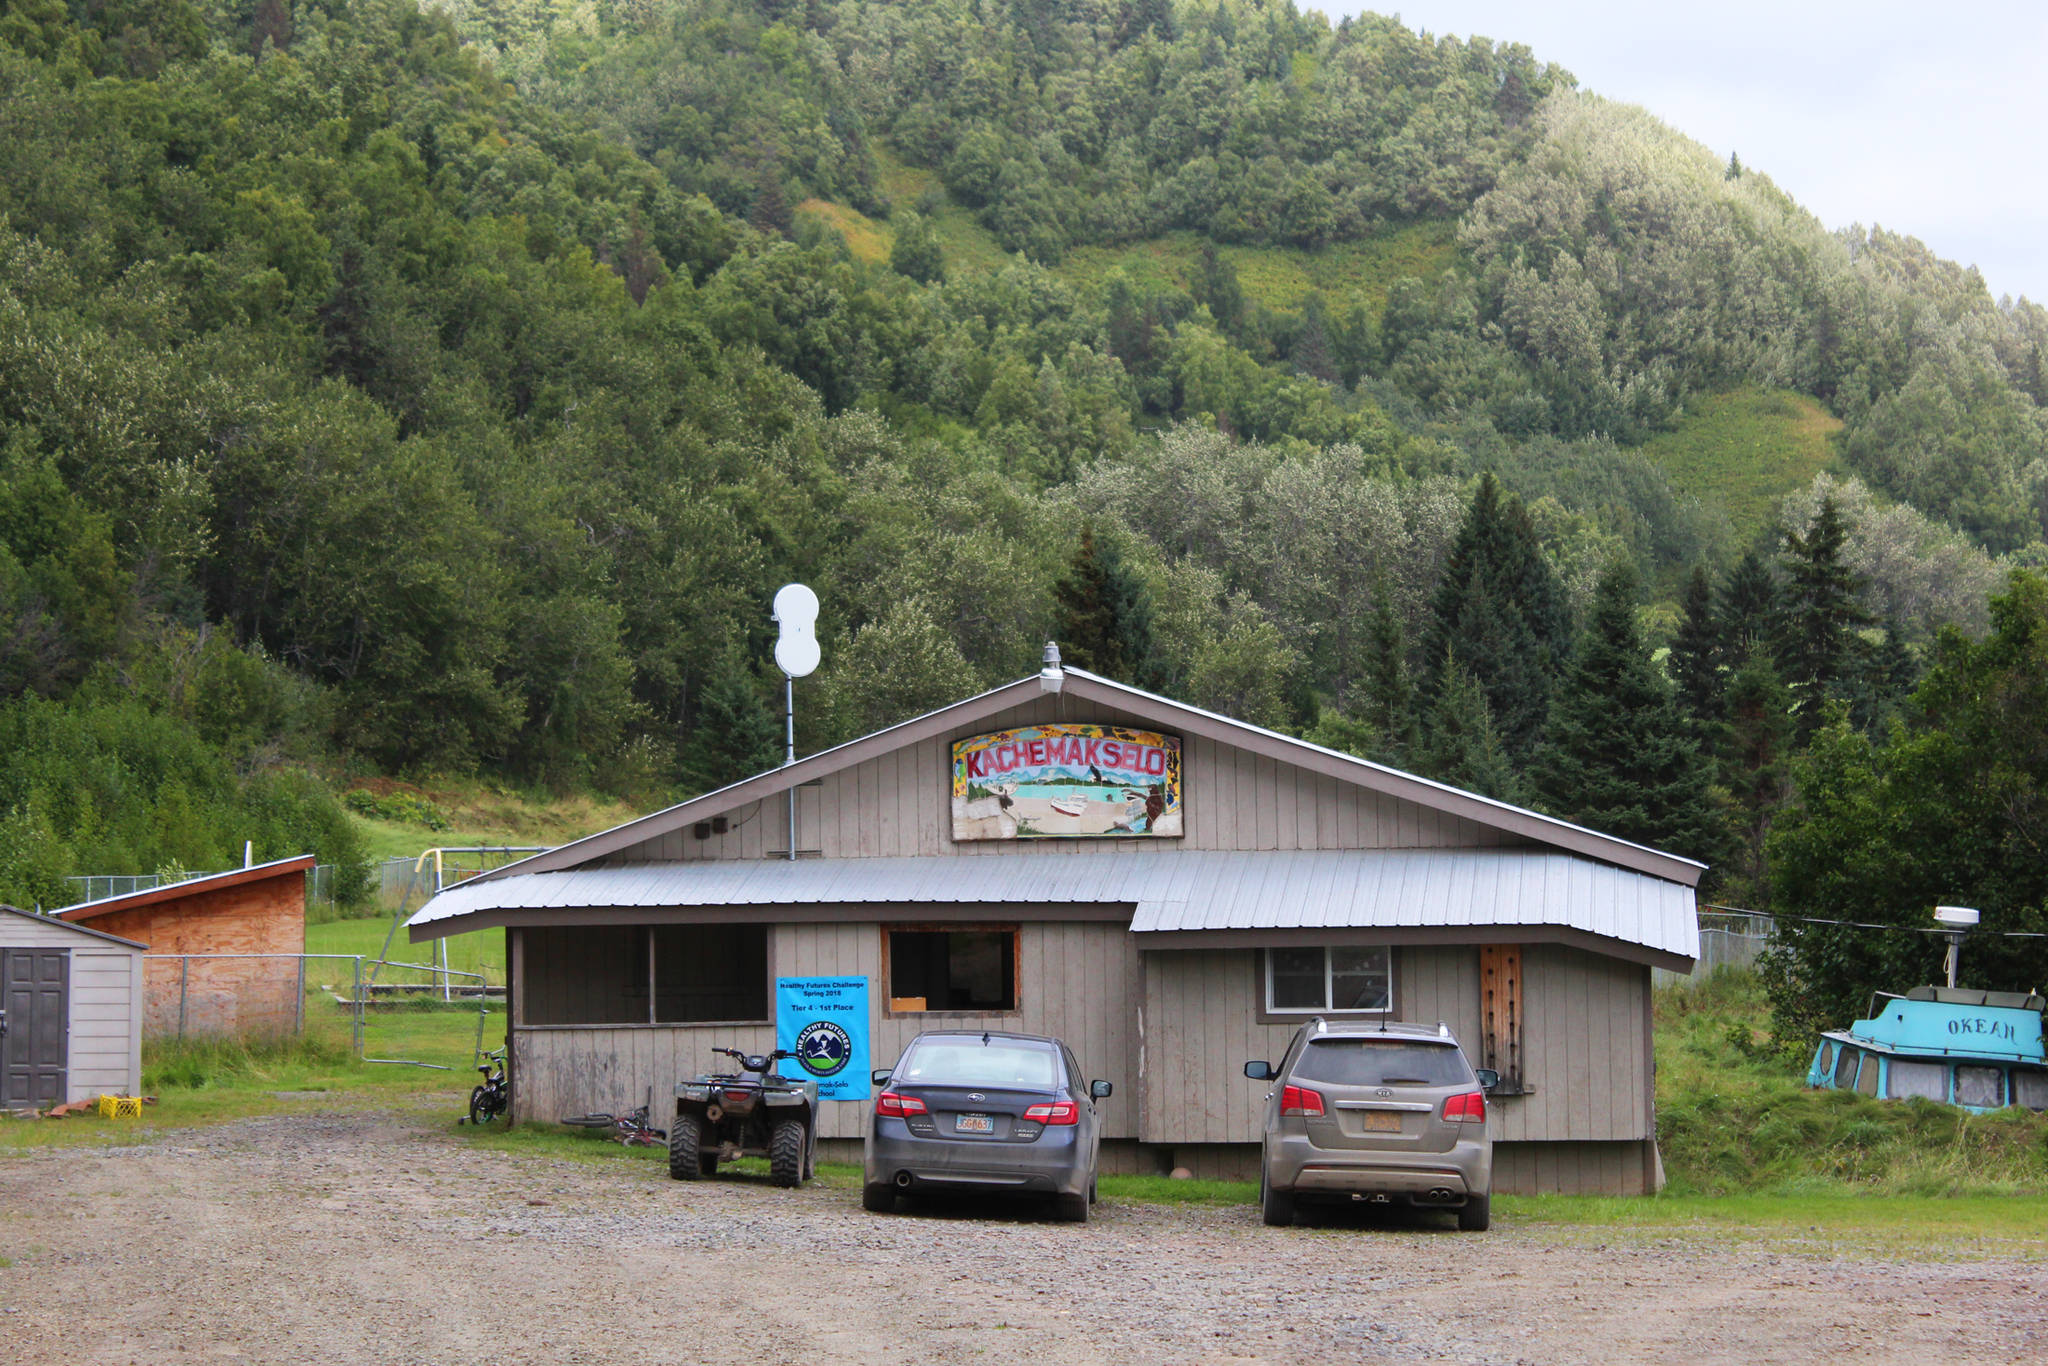 One of the two buildings used to teach elementary school children in Kachemak Selo sits on the outer edge of the village Thursday, Aug. 30, 2018 in the village at the head of Kachemak Bay. (Photo by Megan Pacer/Homer News)